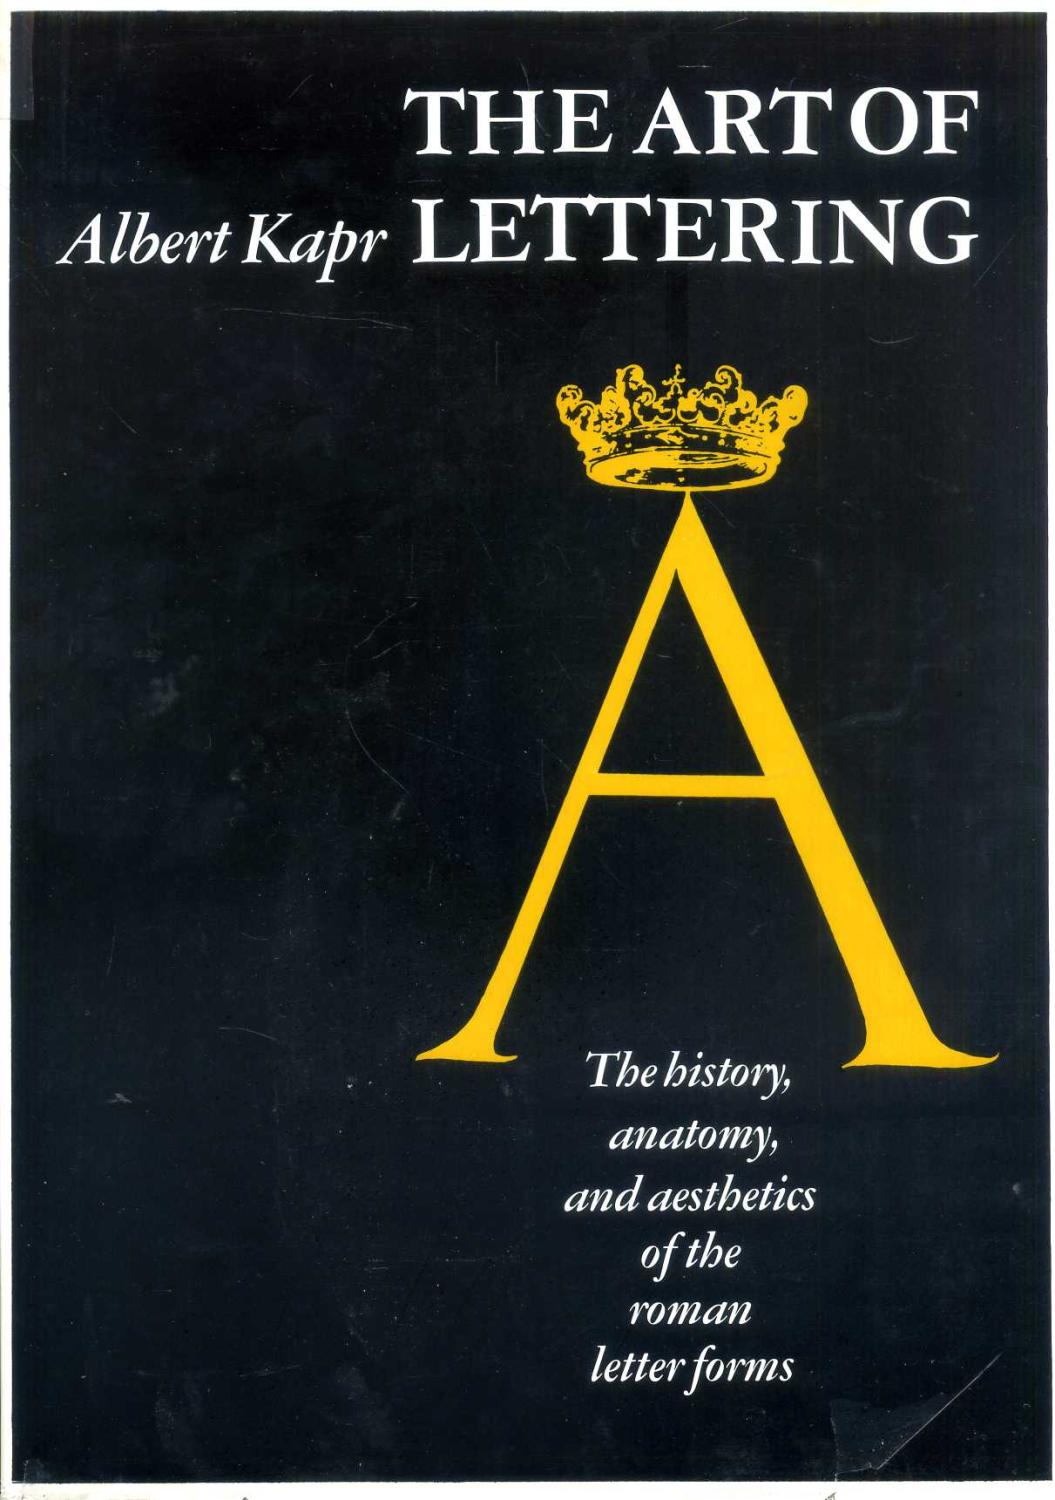 The art of lettering: the history, anatomy, and aesthetics of the Roman letter forms